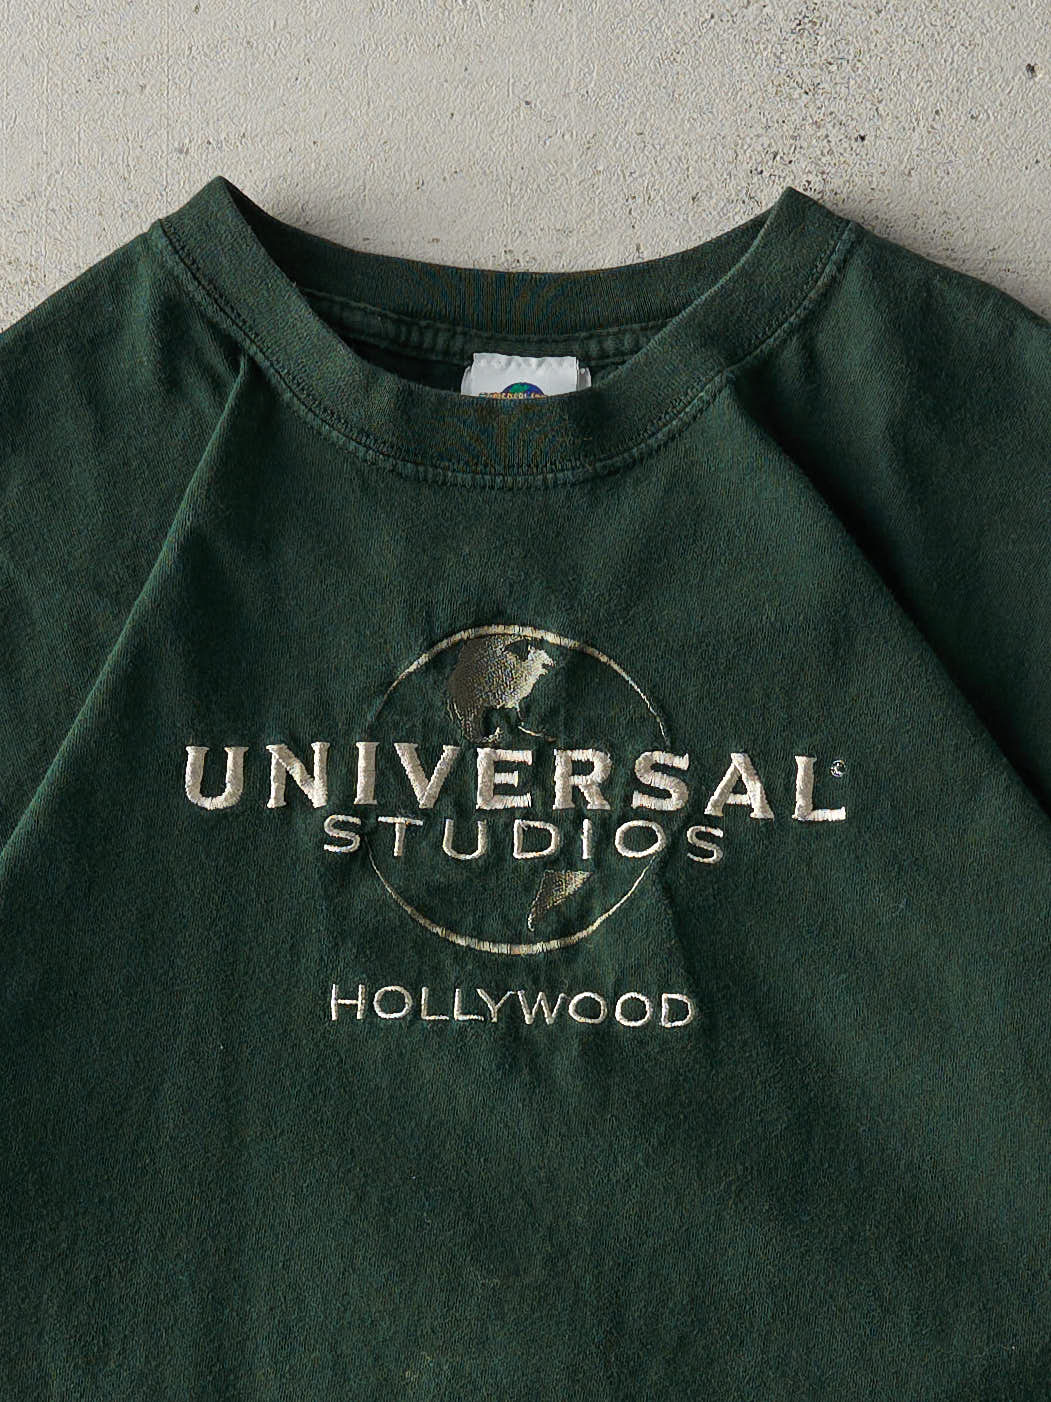 Vintage Y2K Forest Green Embroidered Universal Studios Hollywood Tee (M)